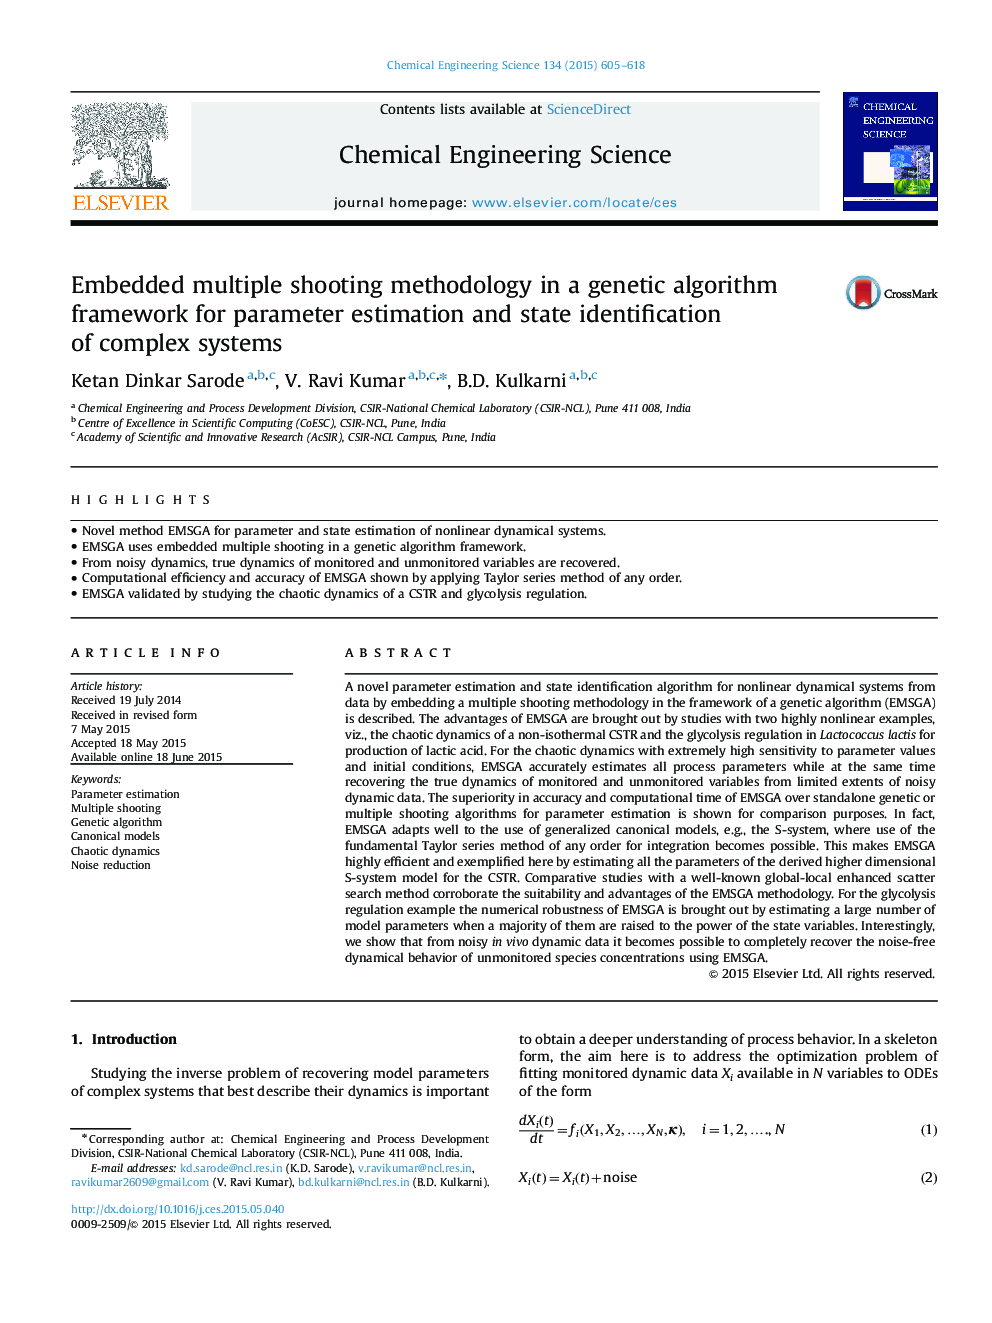 Embedded multiple shooting methodology in a genetic algorithm framework for parameter estimation and state identification of complex systems